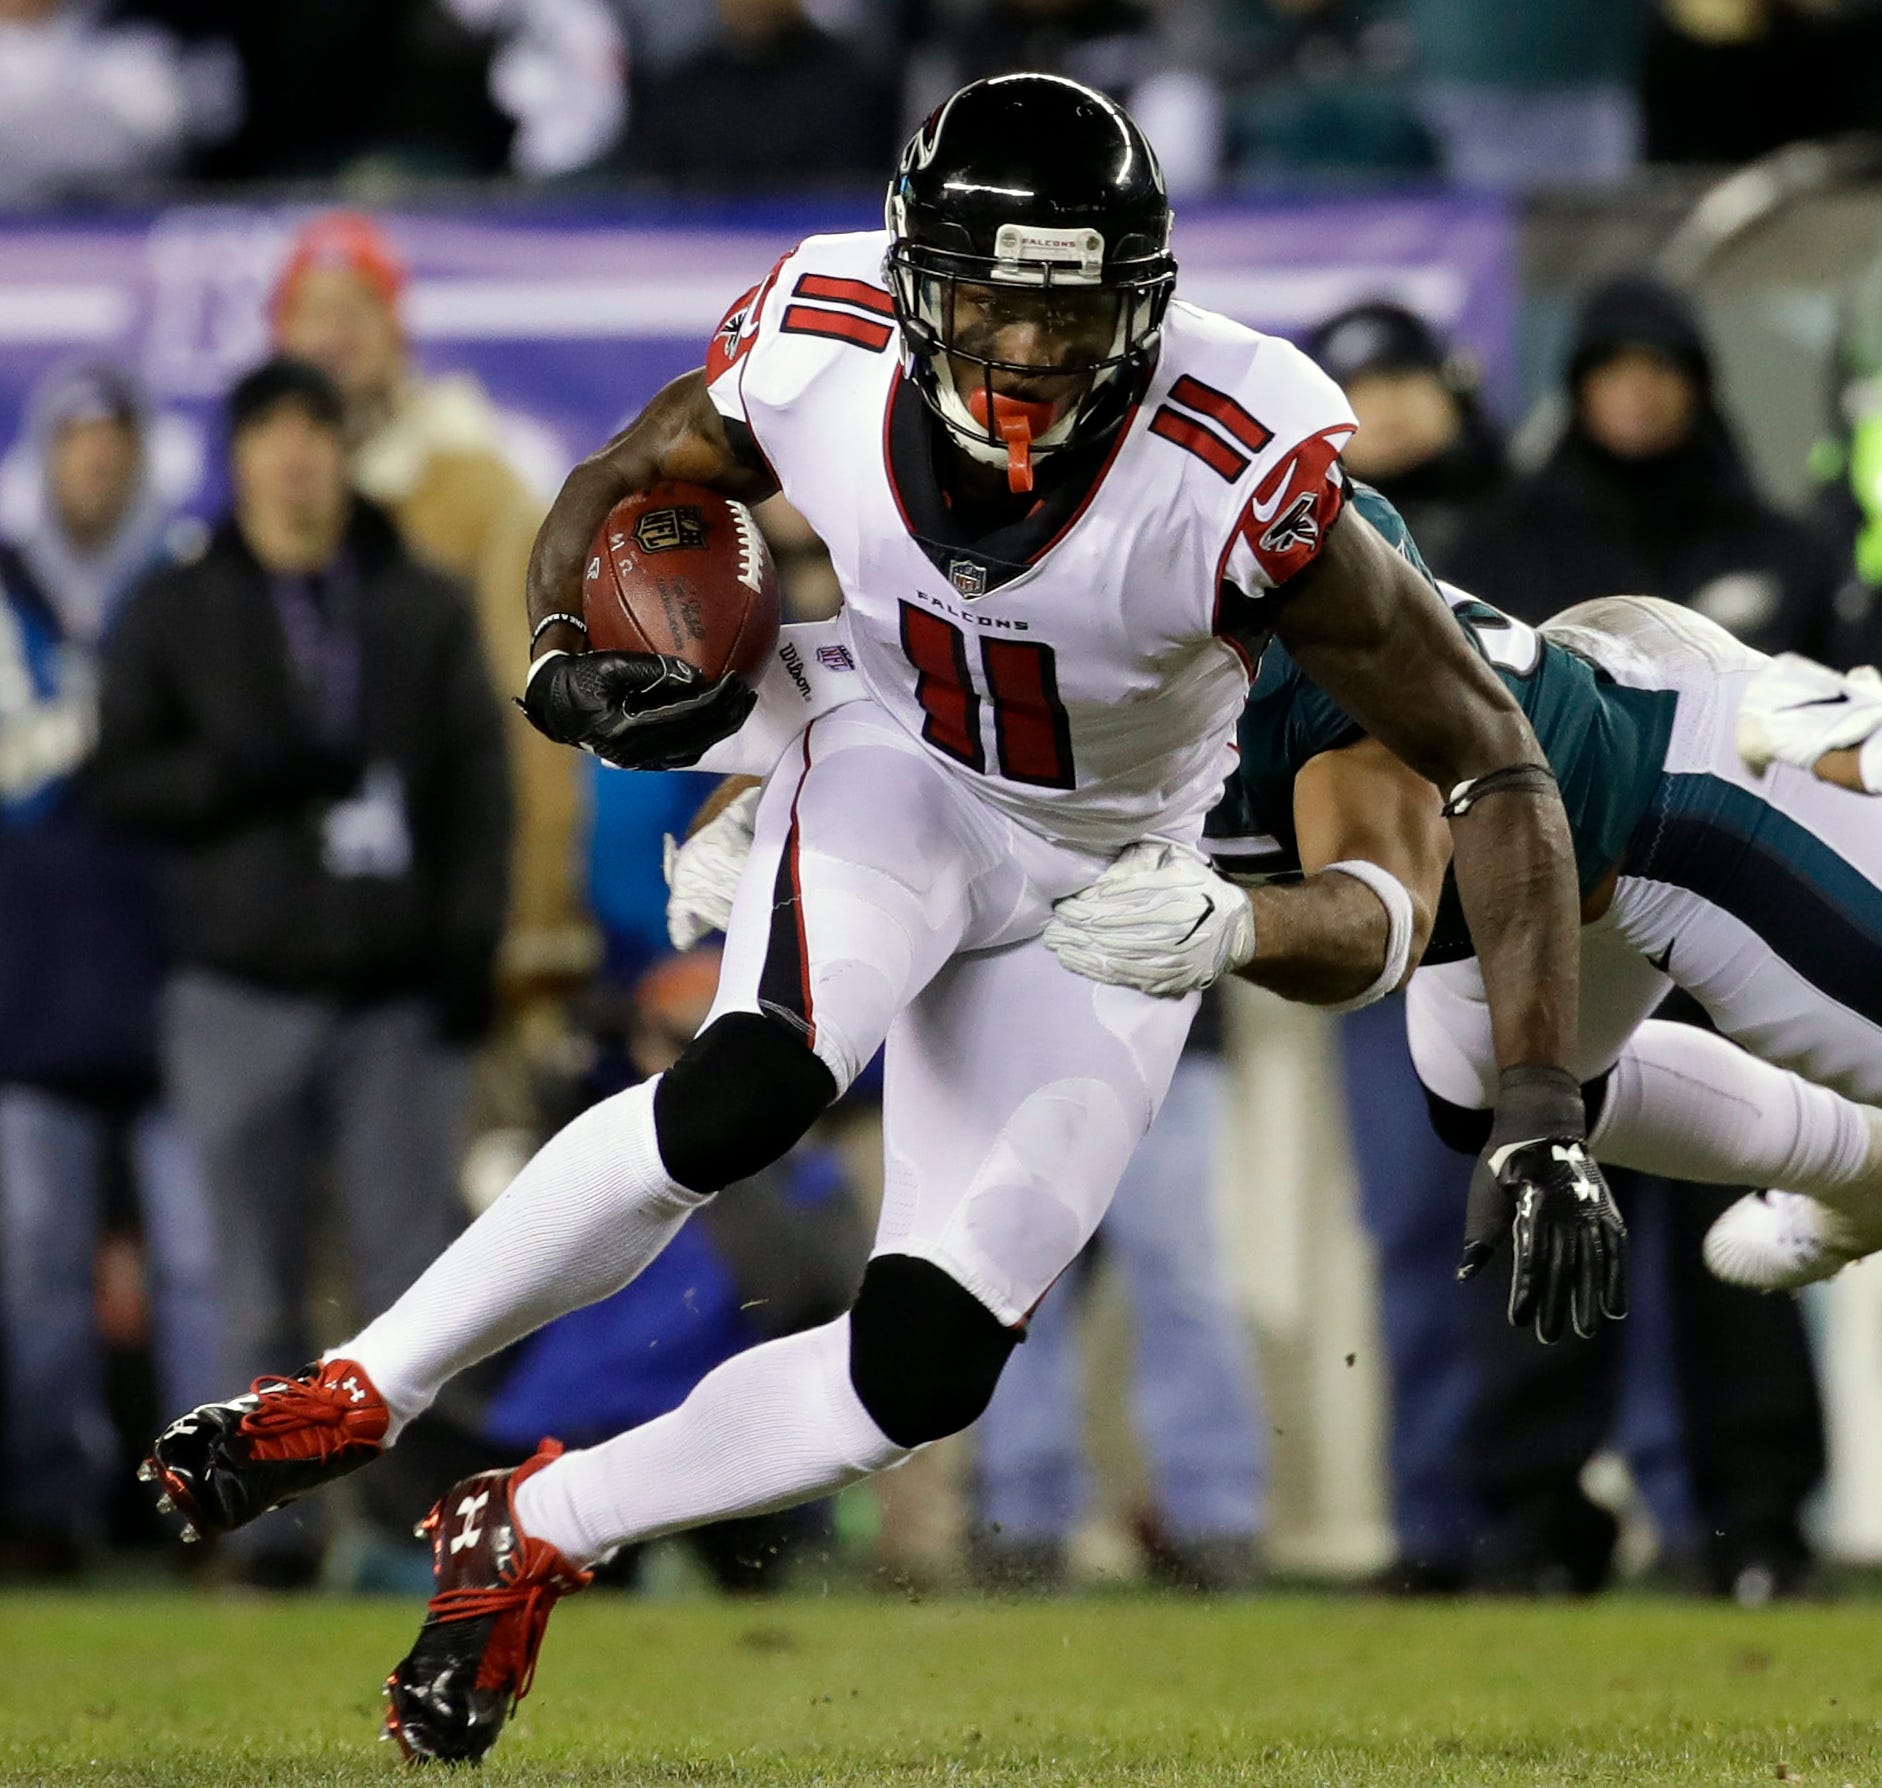 AP source: Falcons won't offer WR Jones new deal this year